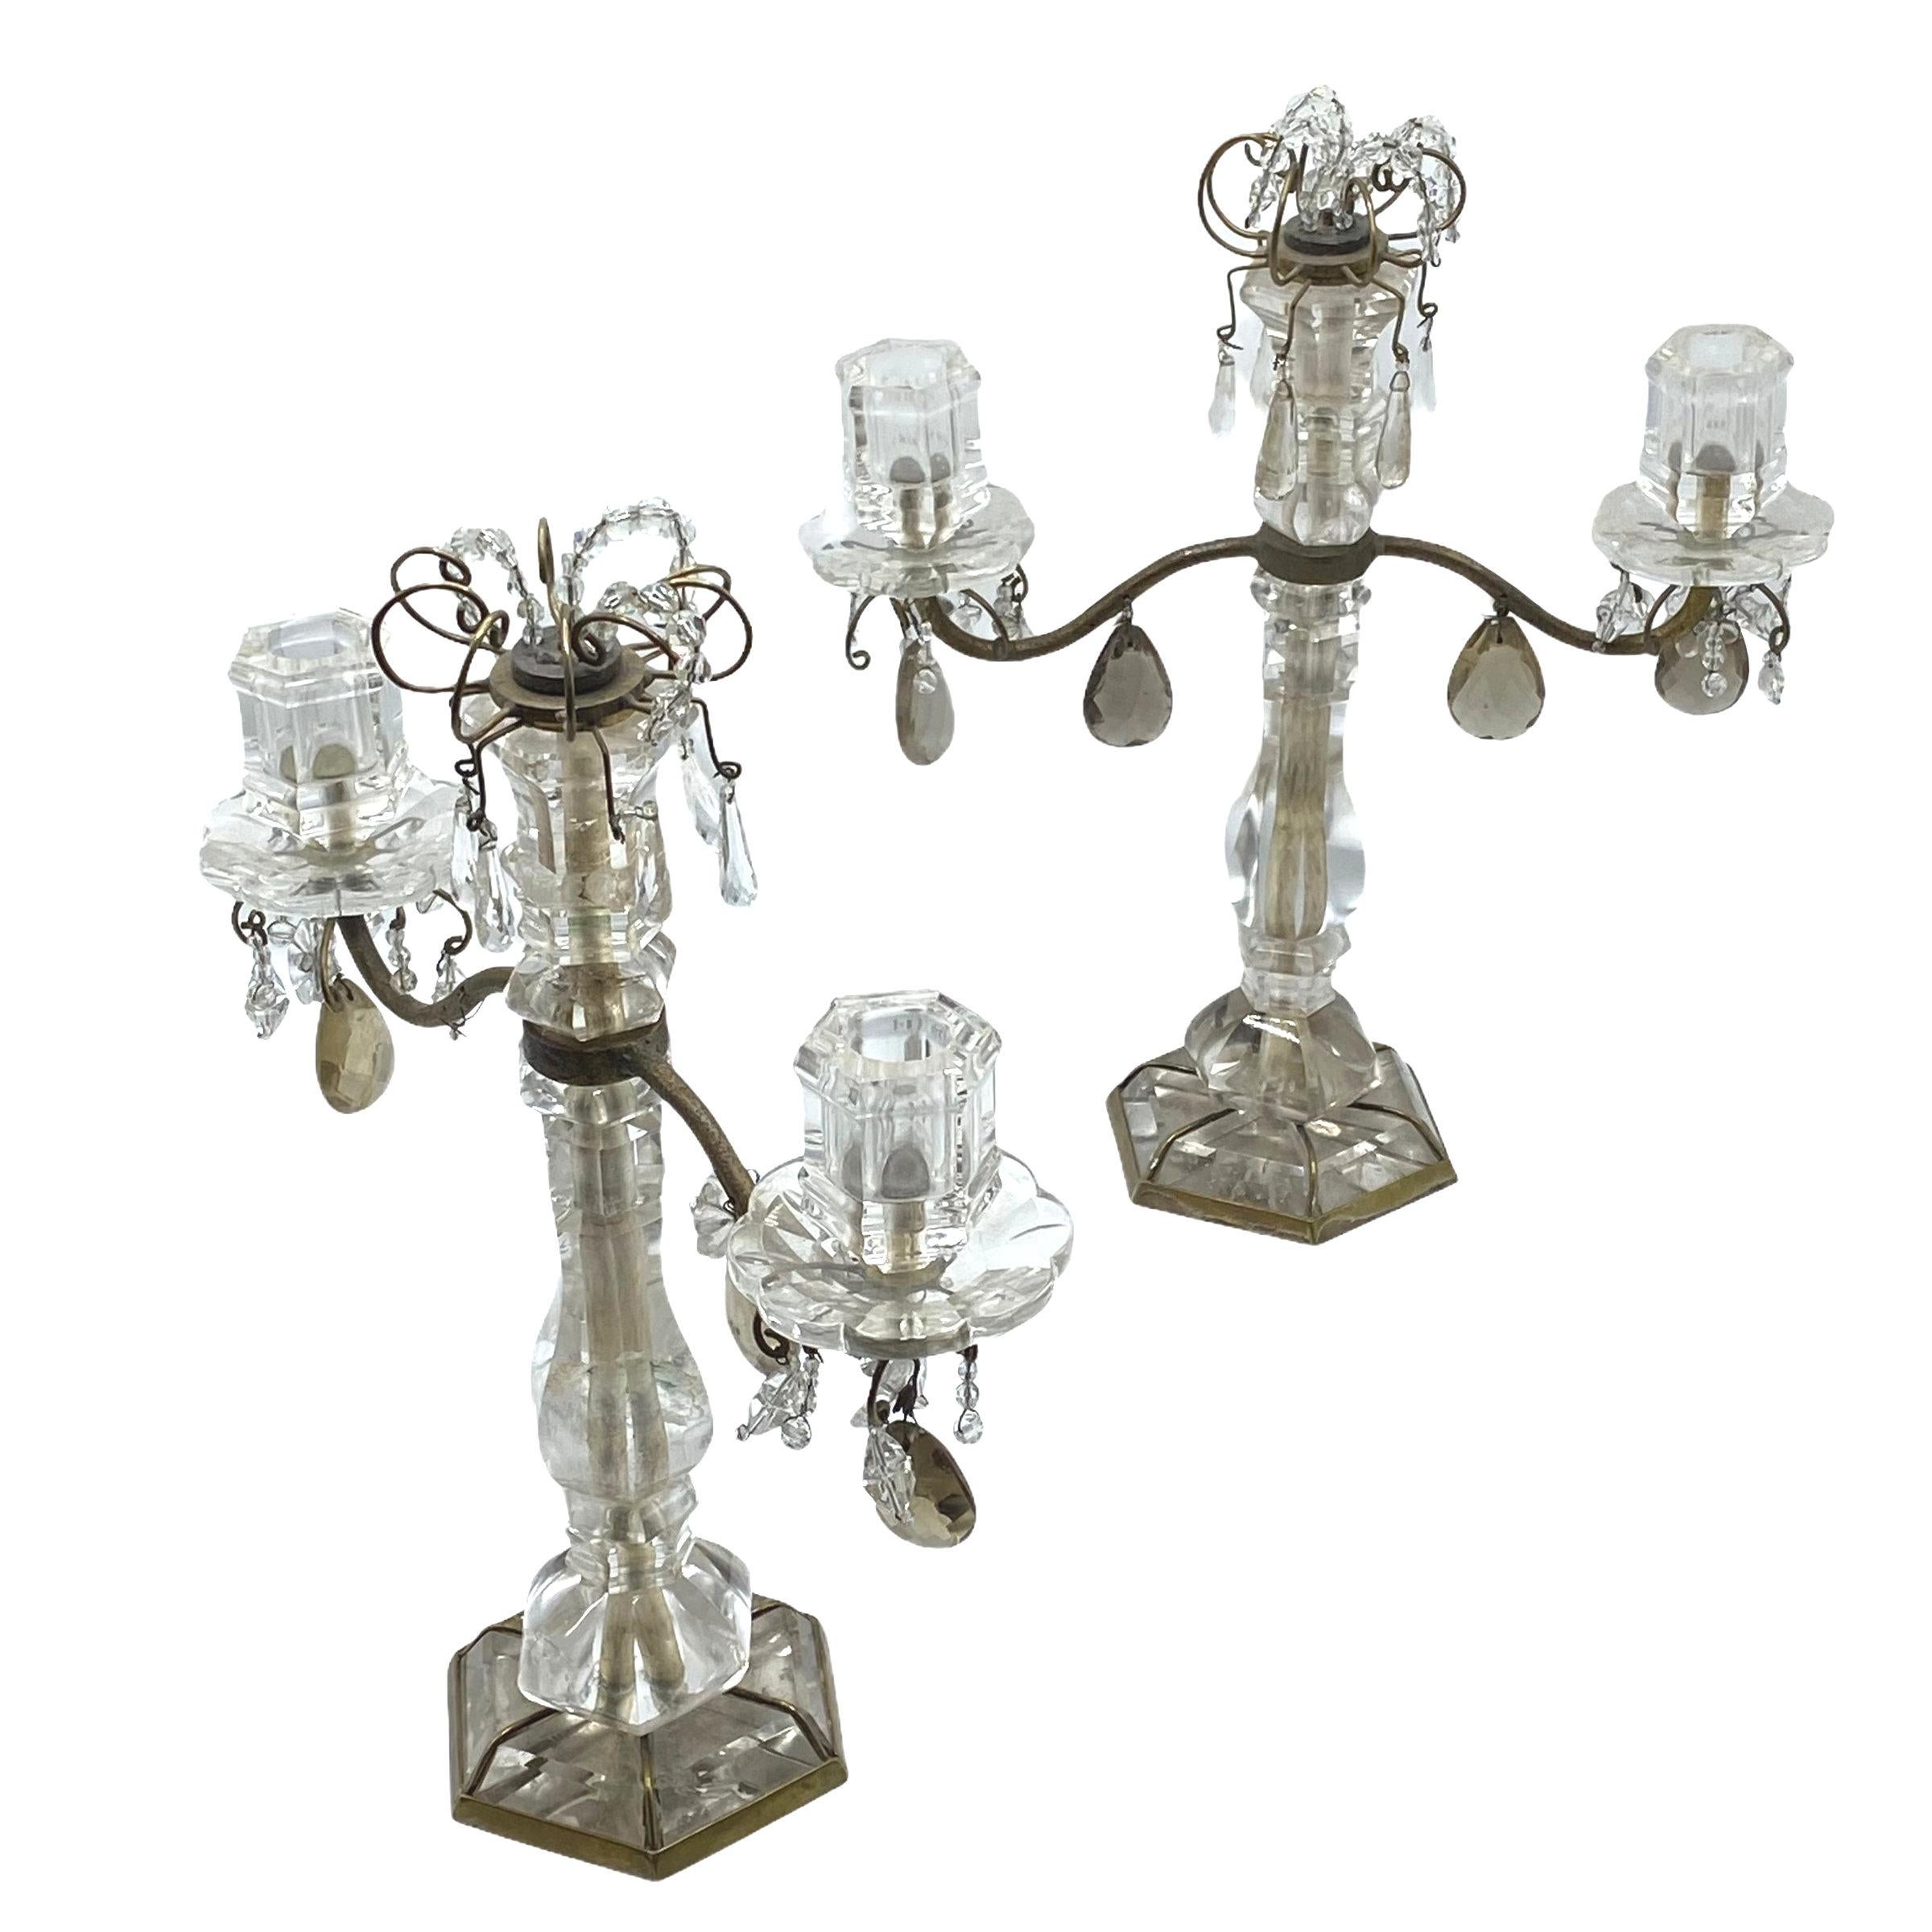 Pair of 19 century French rock crystal and bronze two-light candelabras.
Very fine quality and high grade rock crystal.